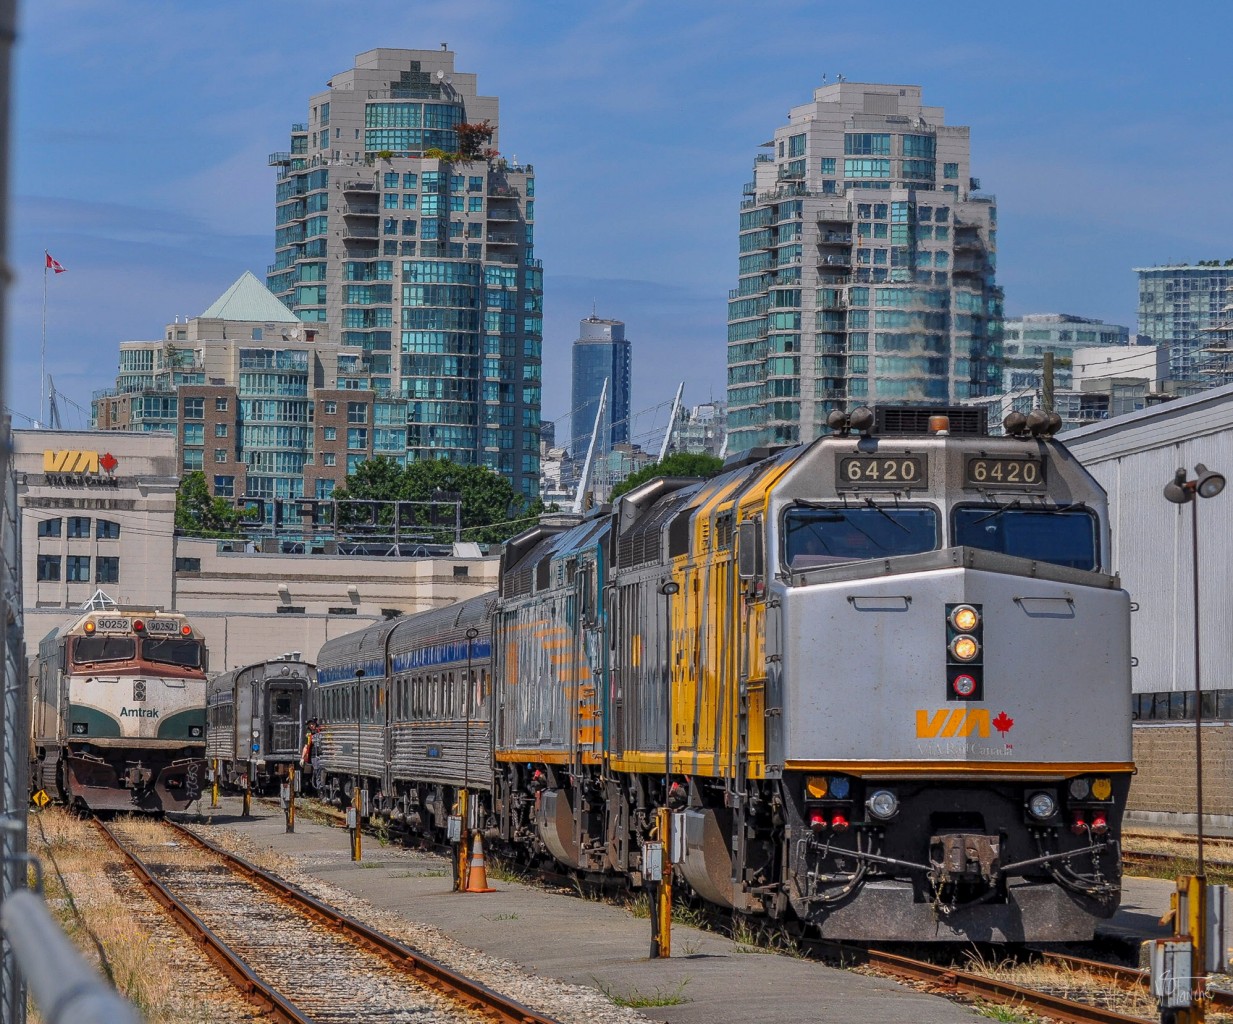 On July 12, 2023, two VIA Rail locomotives are working on a train of cars destined for the Canadian. In the background on the left, we can see the amtrak 516 which finished its journey from the state of Washington